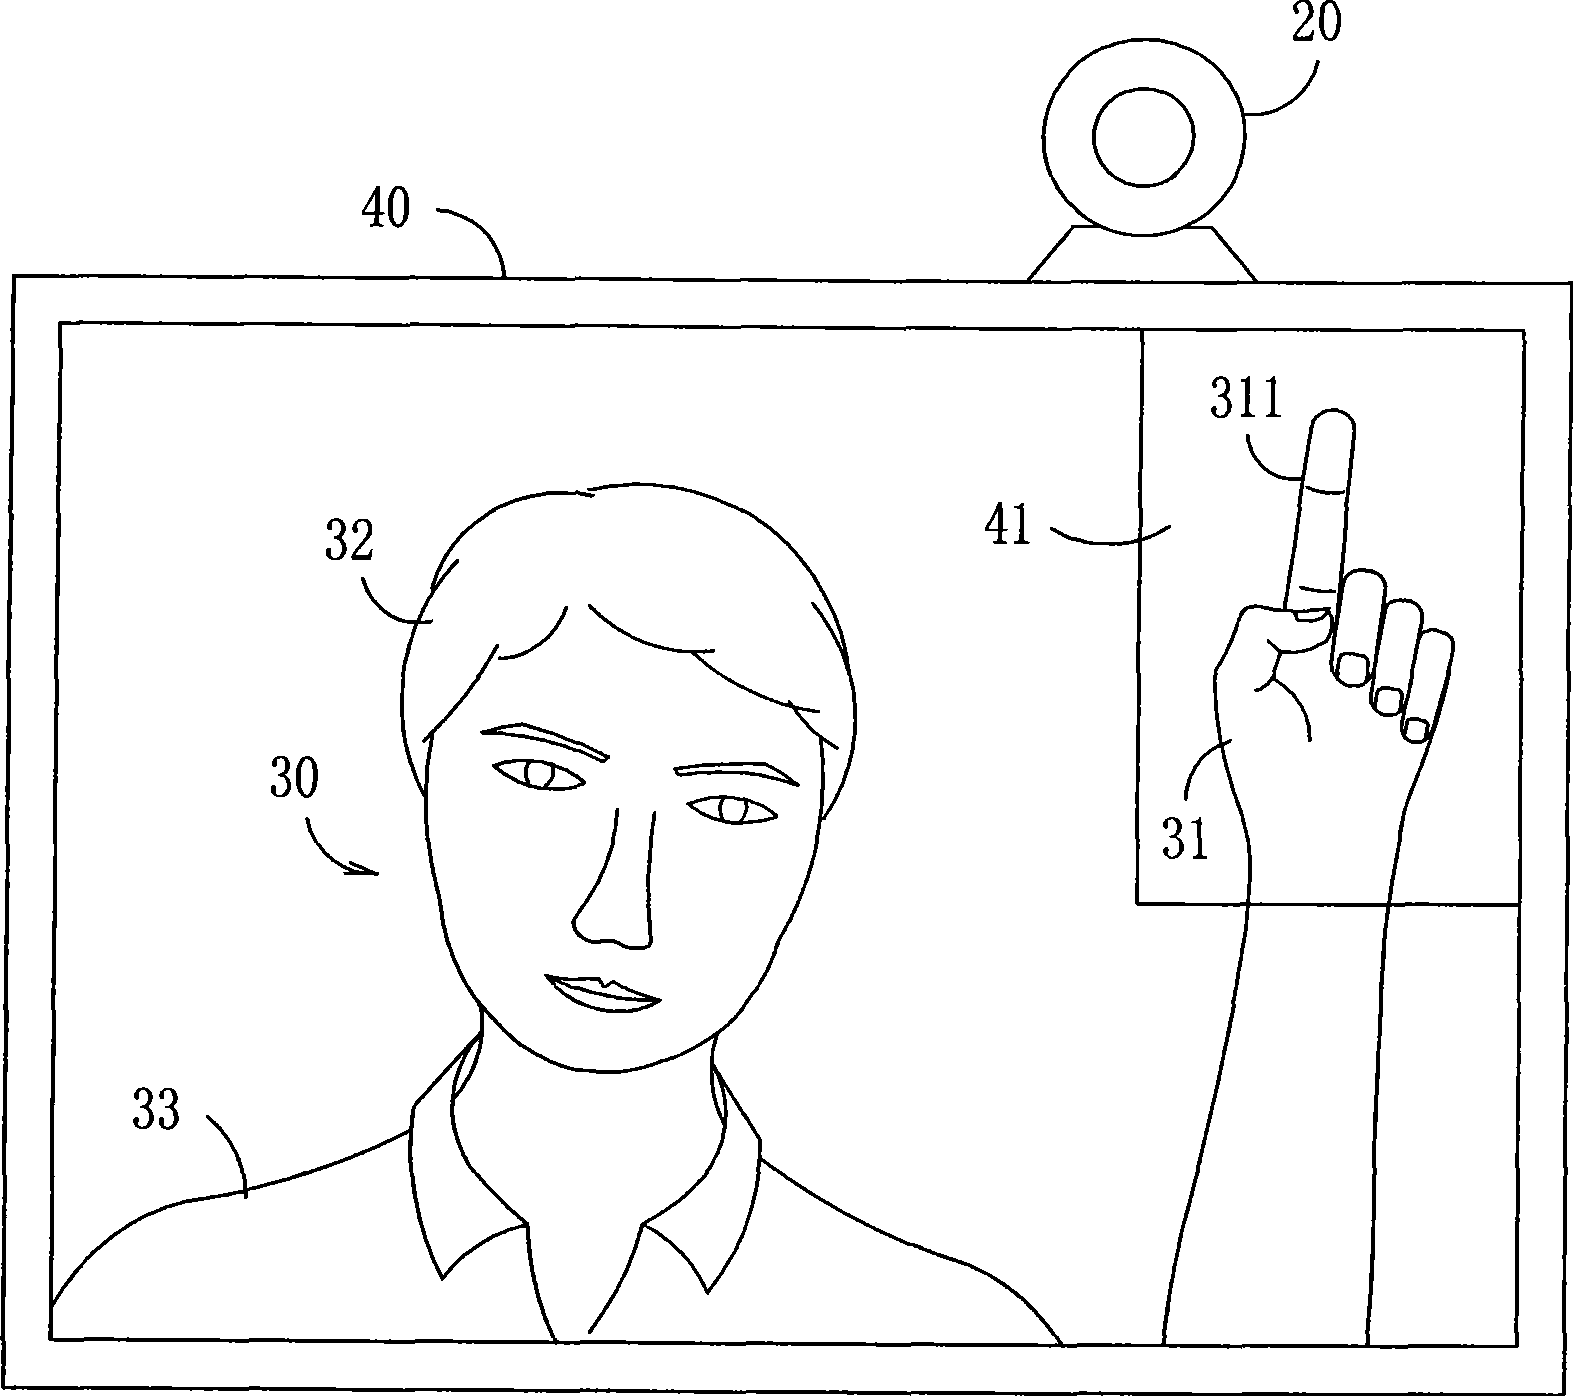 Method for calculating position of unstructured object in continuous image